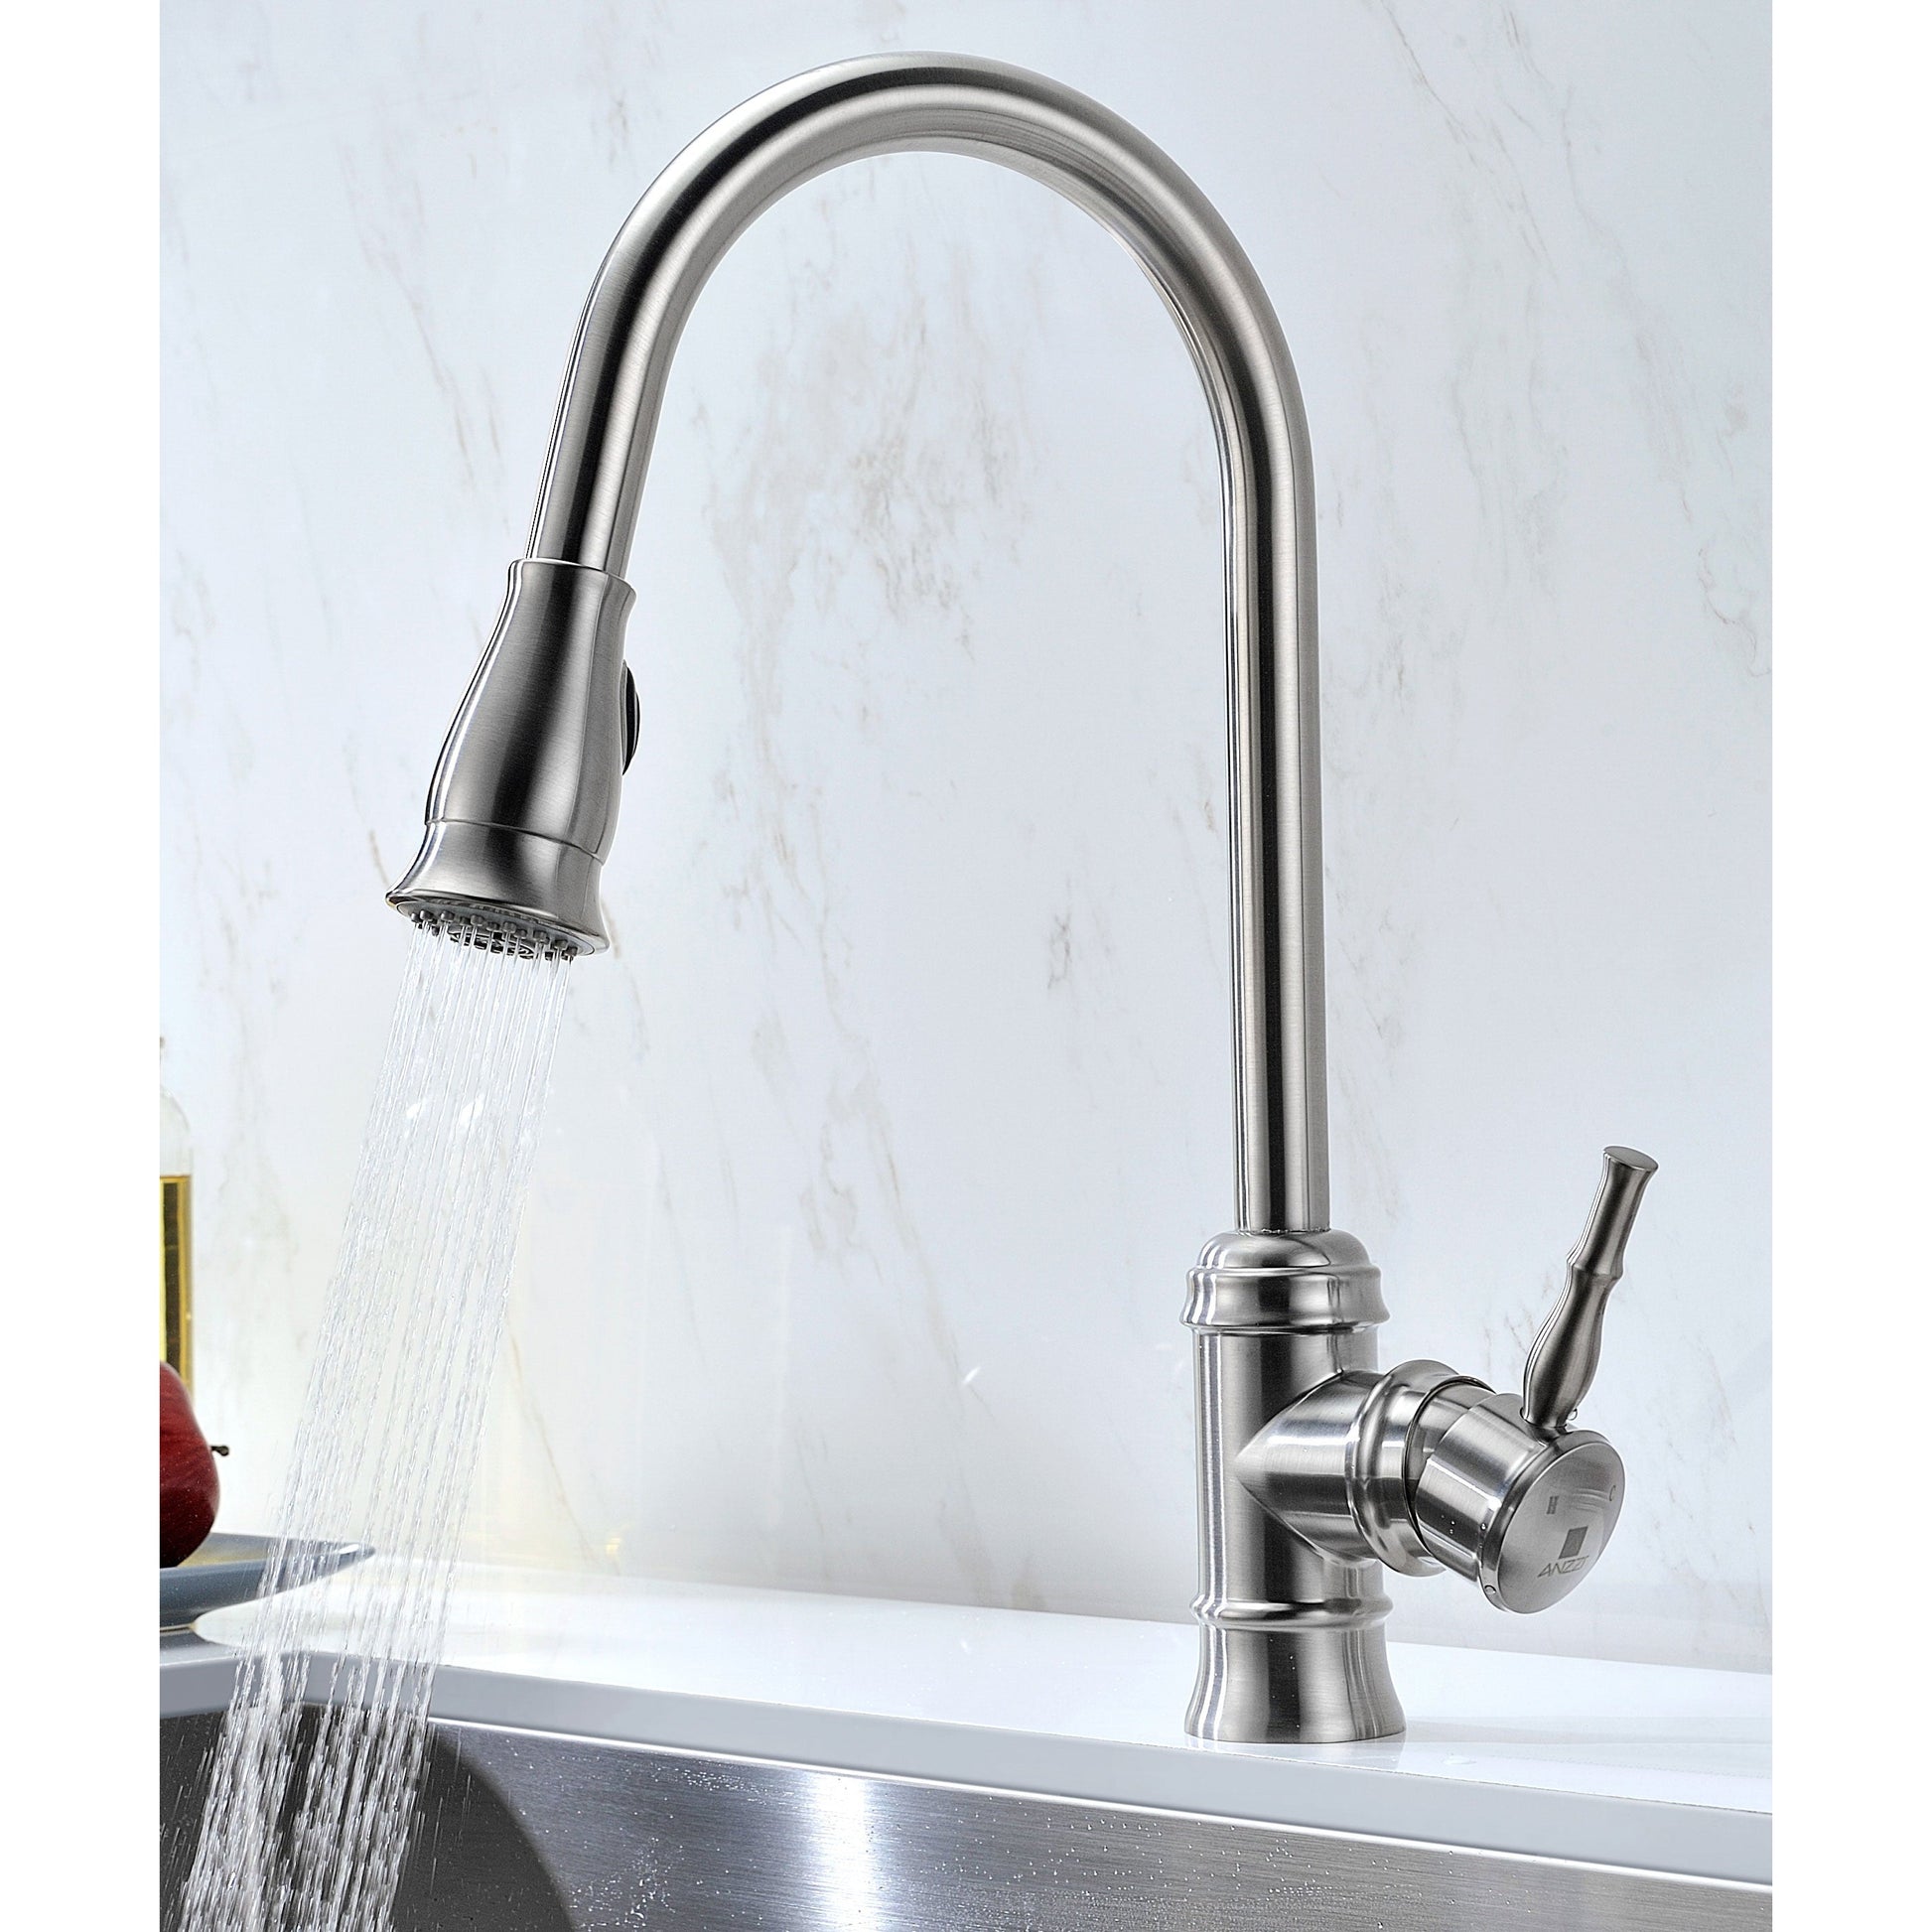 ANZZI Vanguard Series 32" Single Bowl Stainless Steel Undermount Kitchen Sink With Strainer, Drain Assembly and Brushed Nickel Sails Faucet